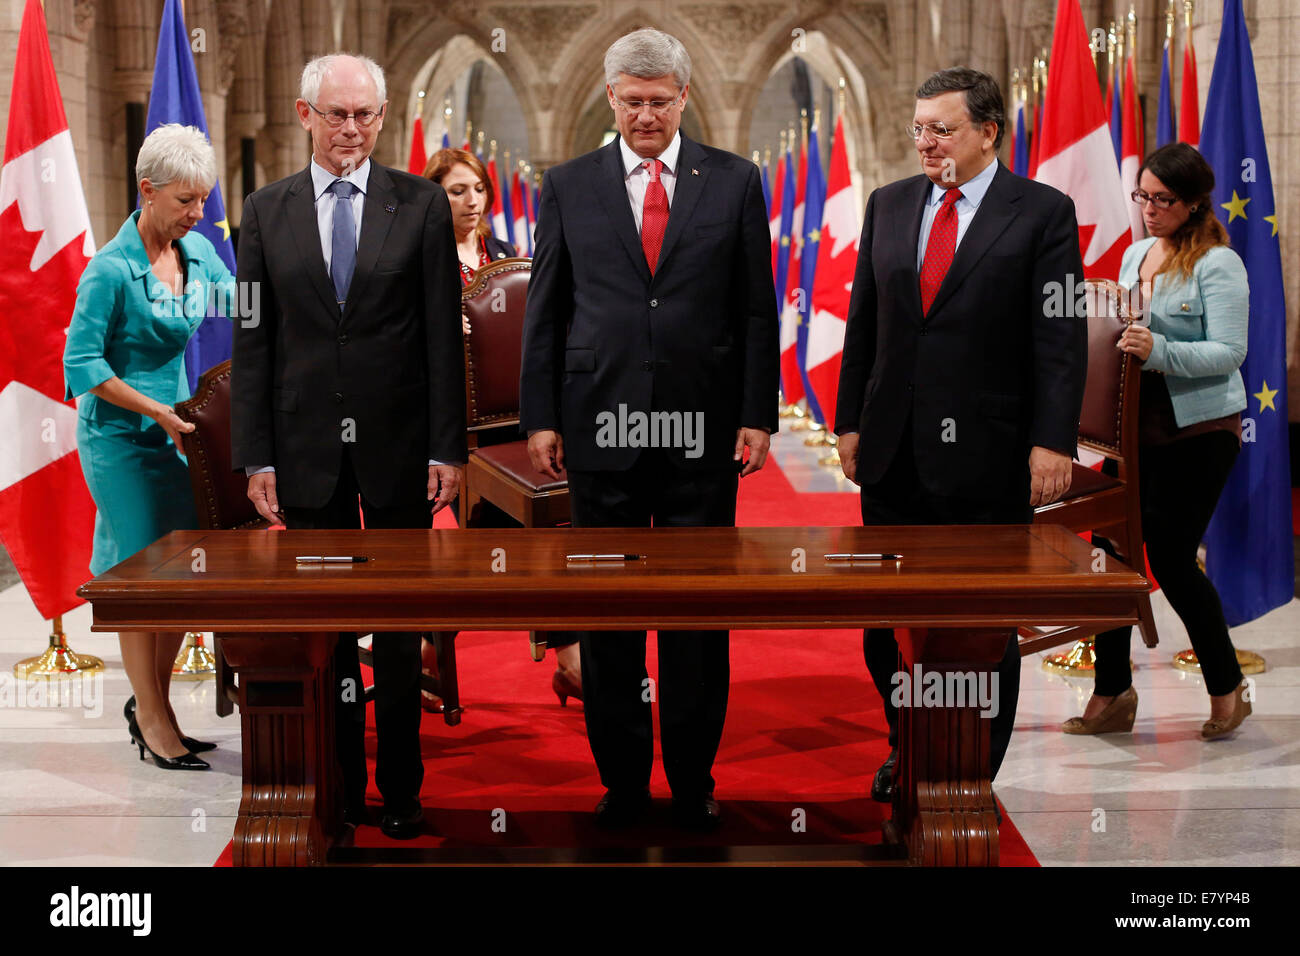 Ottawa. 26th Sep, 2014. Canada's Prime Minister Stephen Harper(C) stands with Herman Van Rompuy (L), President of the European Council, and Jose Manuel Barroso, President of the European Commission before the signing ceremony at Parliament Hill in Ottawa, Canada on Sept. 26, 2014. The European Union leaders were in town to officially sign on the Canada-EU Comprehensive Economic and Trade Agreement(CETA), for which negotiations ended in August, and which still needs to be approved by the European Council and the EU parliament. Credit:  David Kawai/Xinhua/Alamy Live News Stock Photo